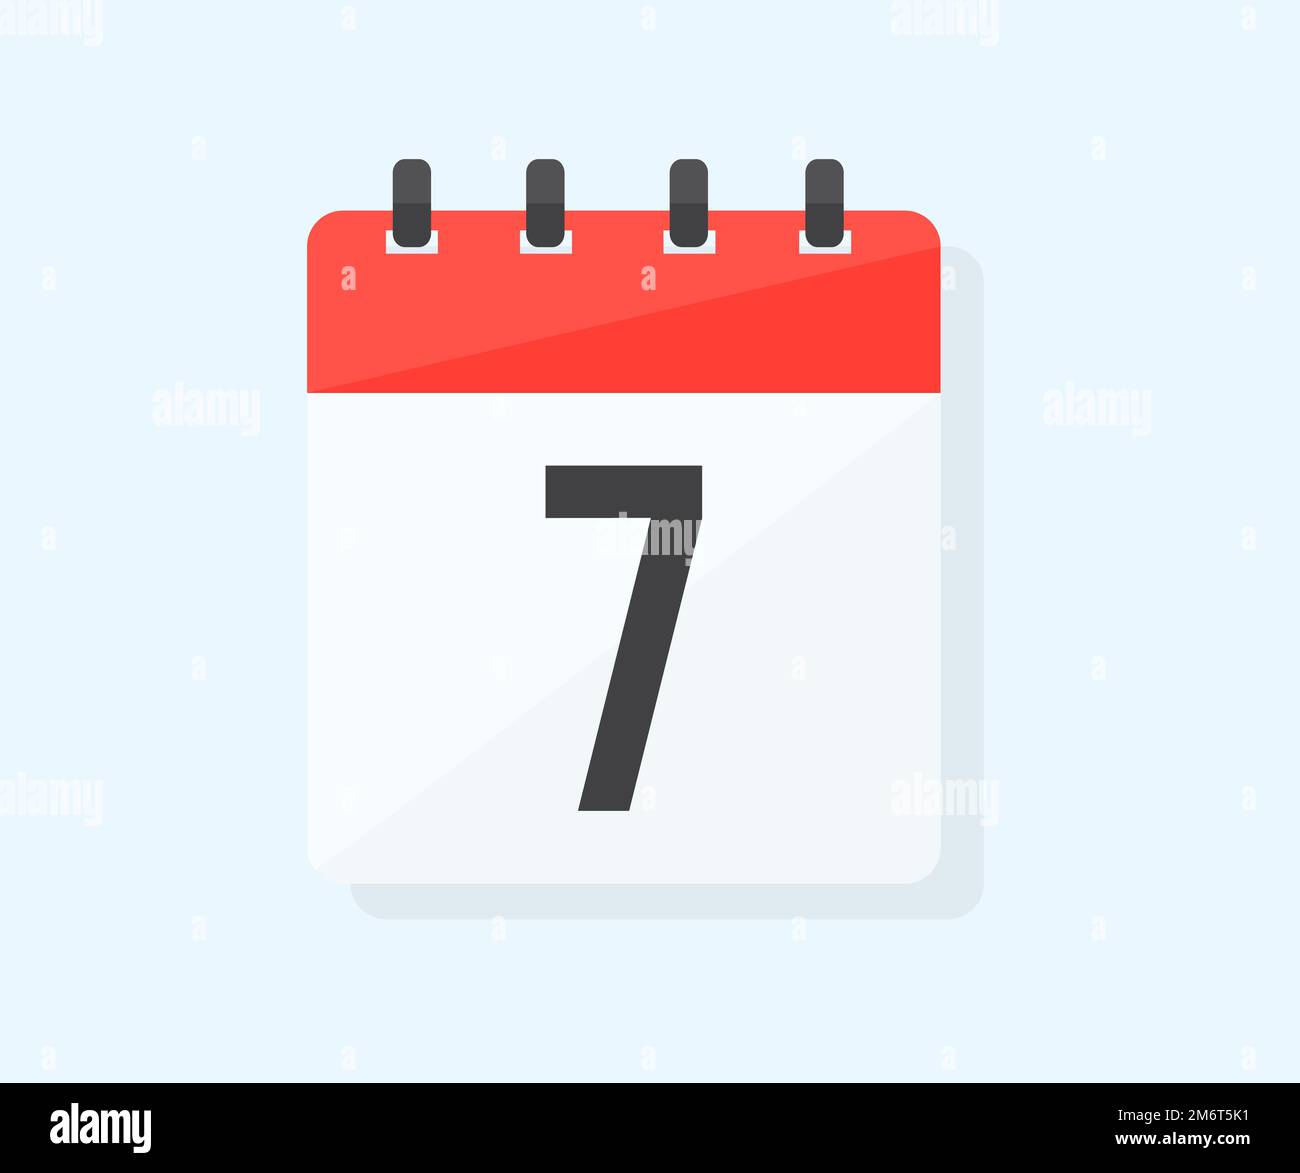 The seventh day of the month with date 7, day seven logo design. Calendar icon flat day 7. Reminder symbol. Event schedule date. Schedule planning. Stock Vector